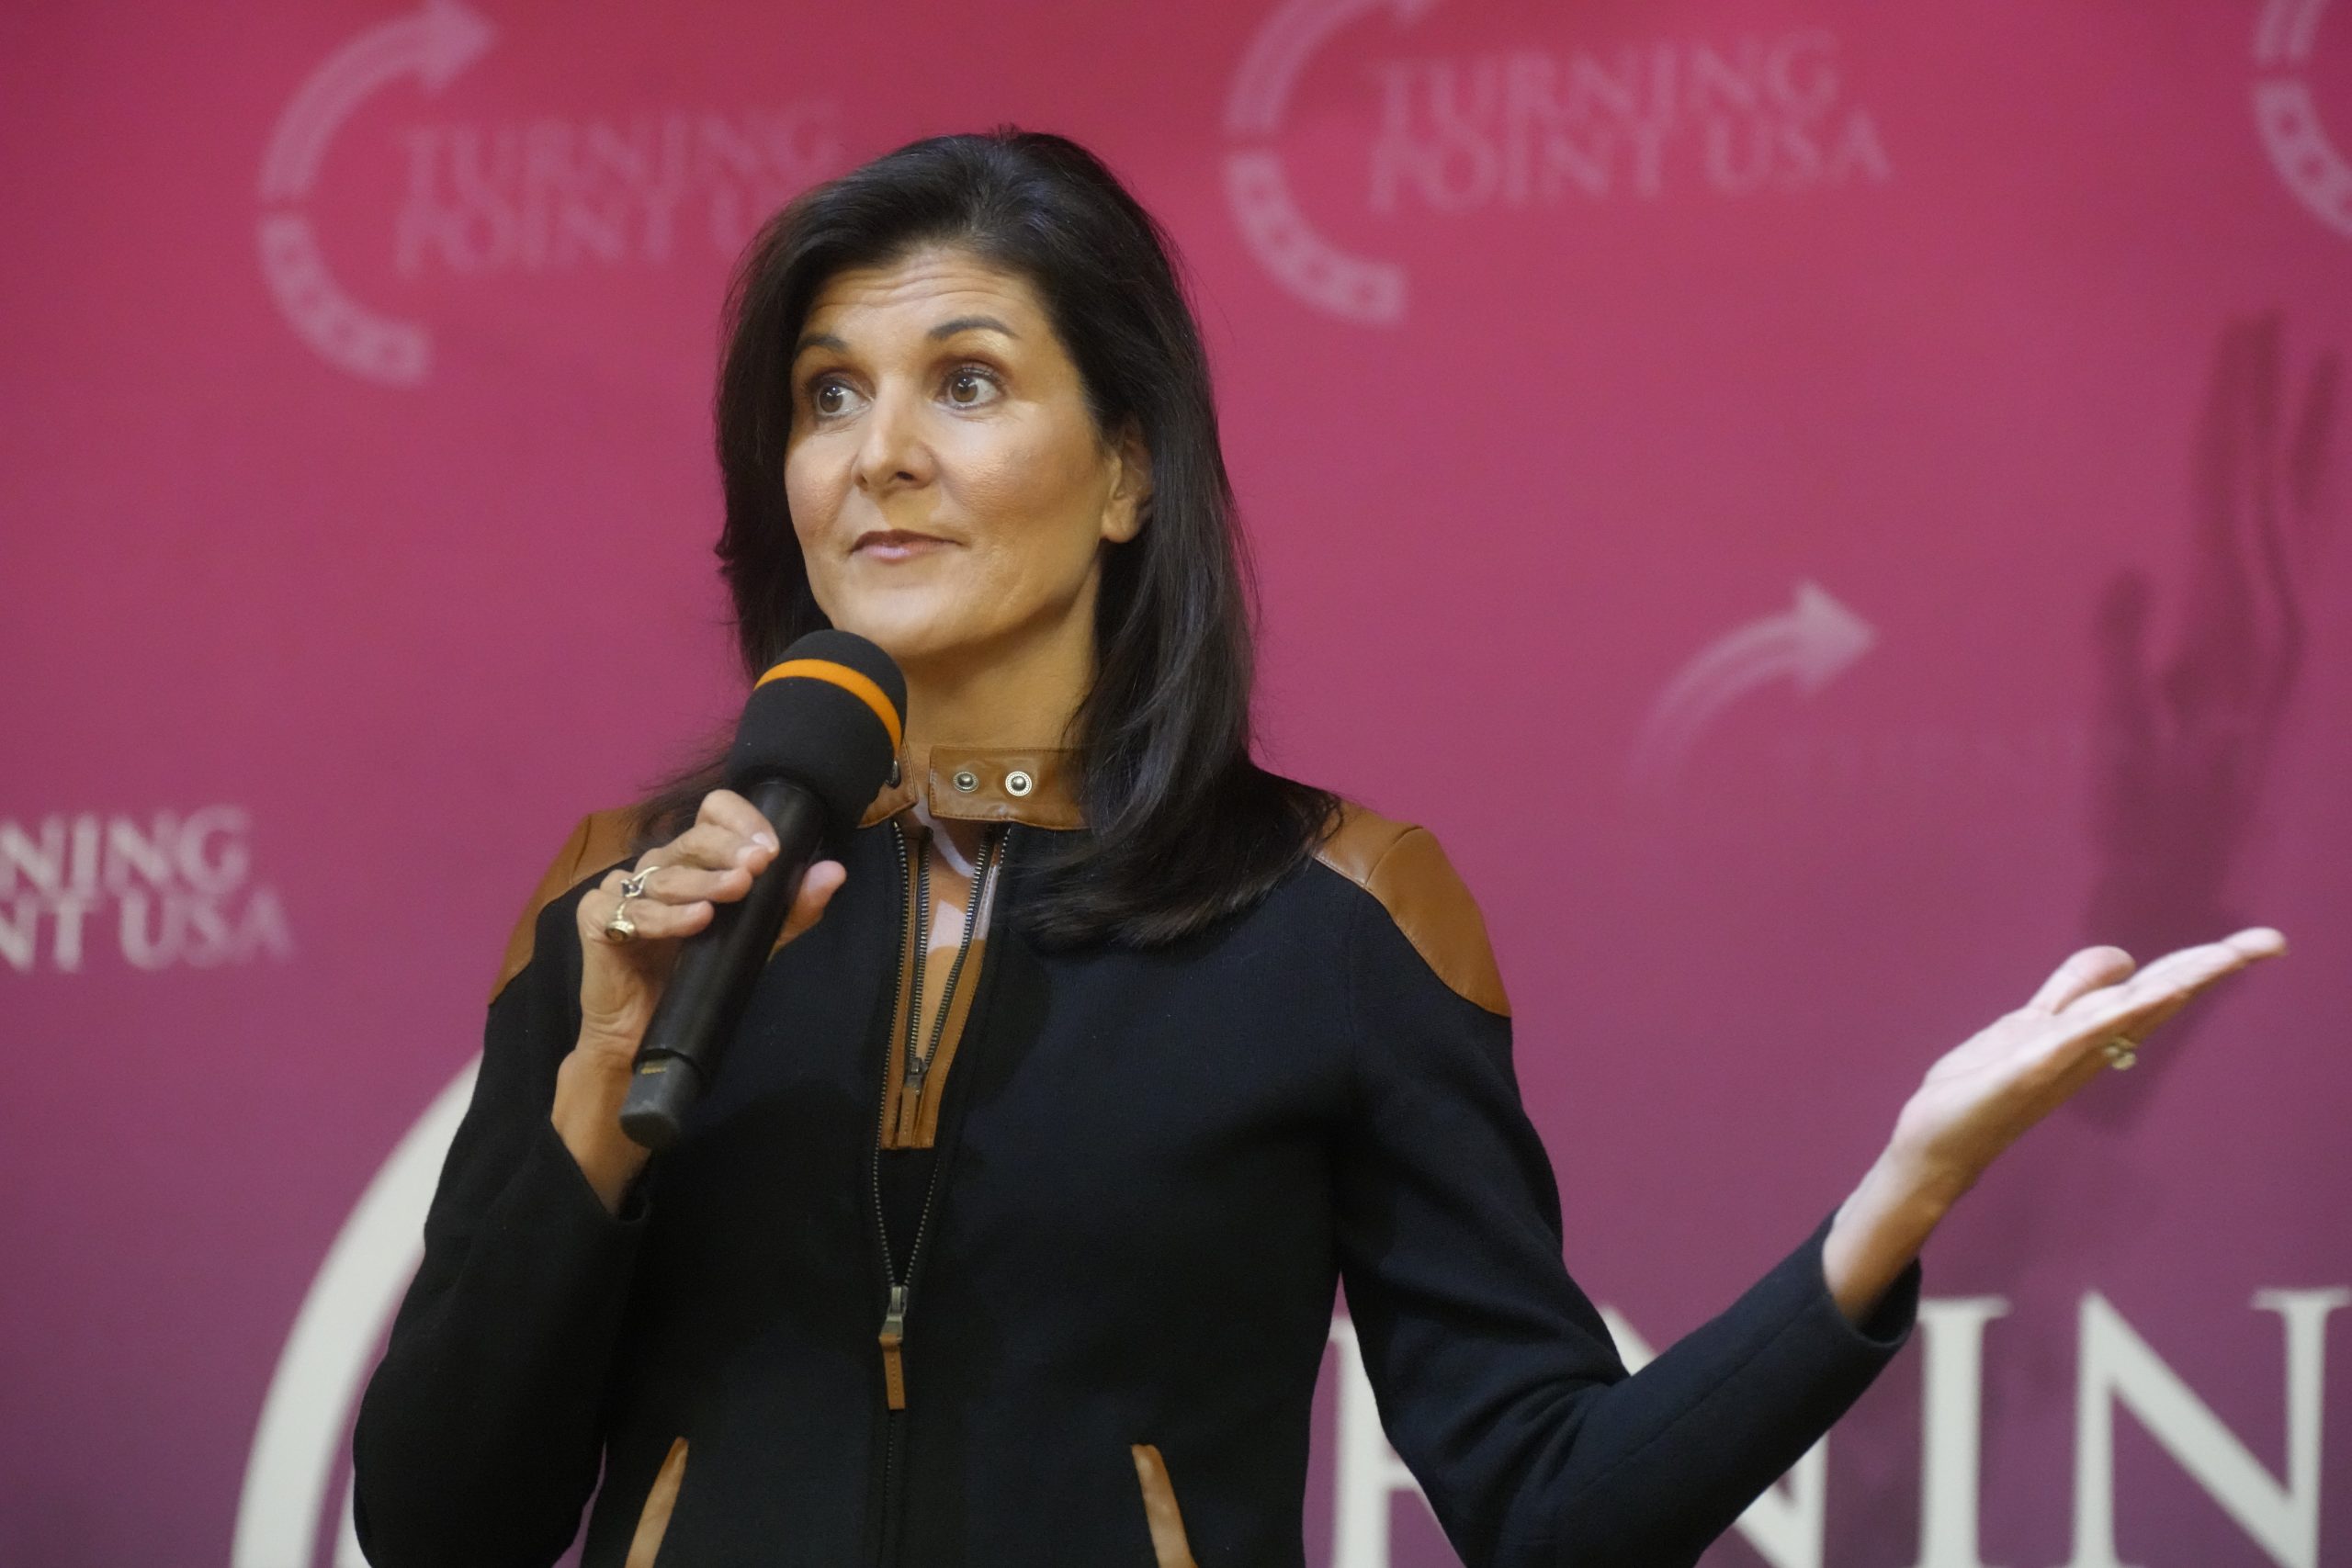 Nikki Haley dismisses Pompeo’s VP claims as ‘lies and gossip’